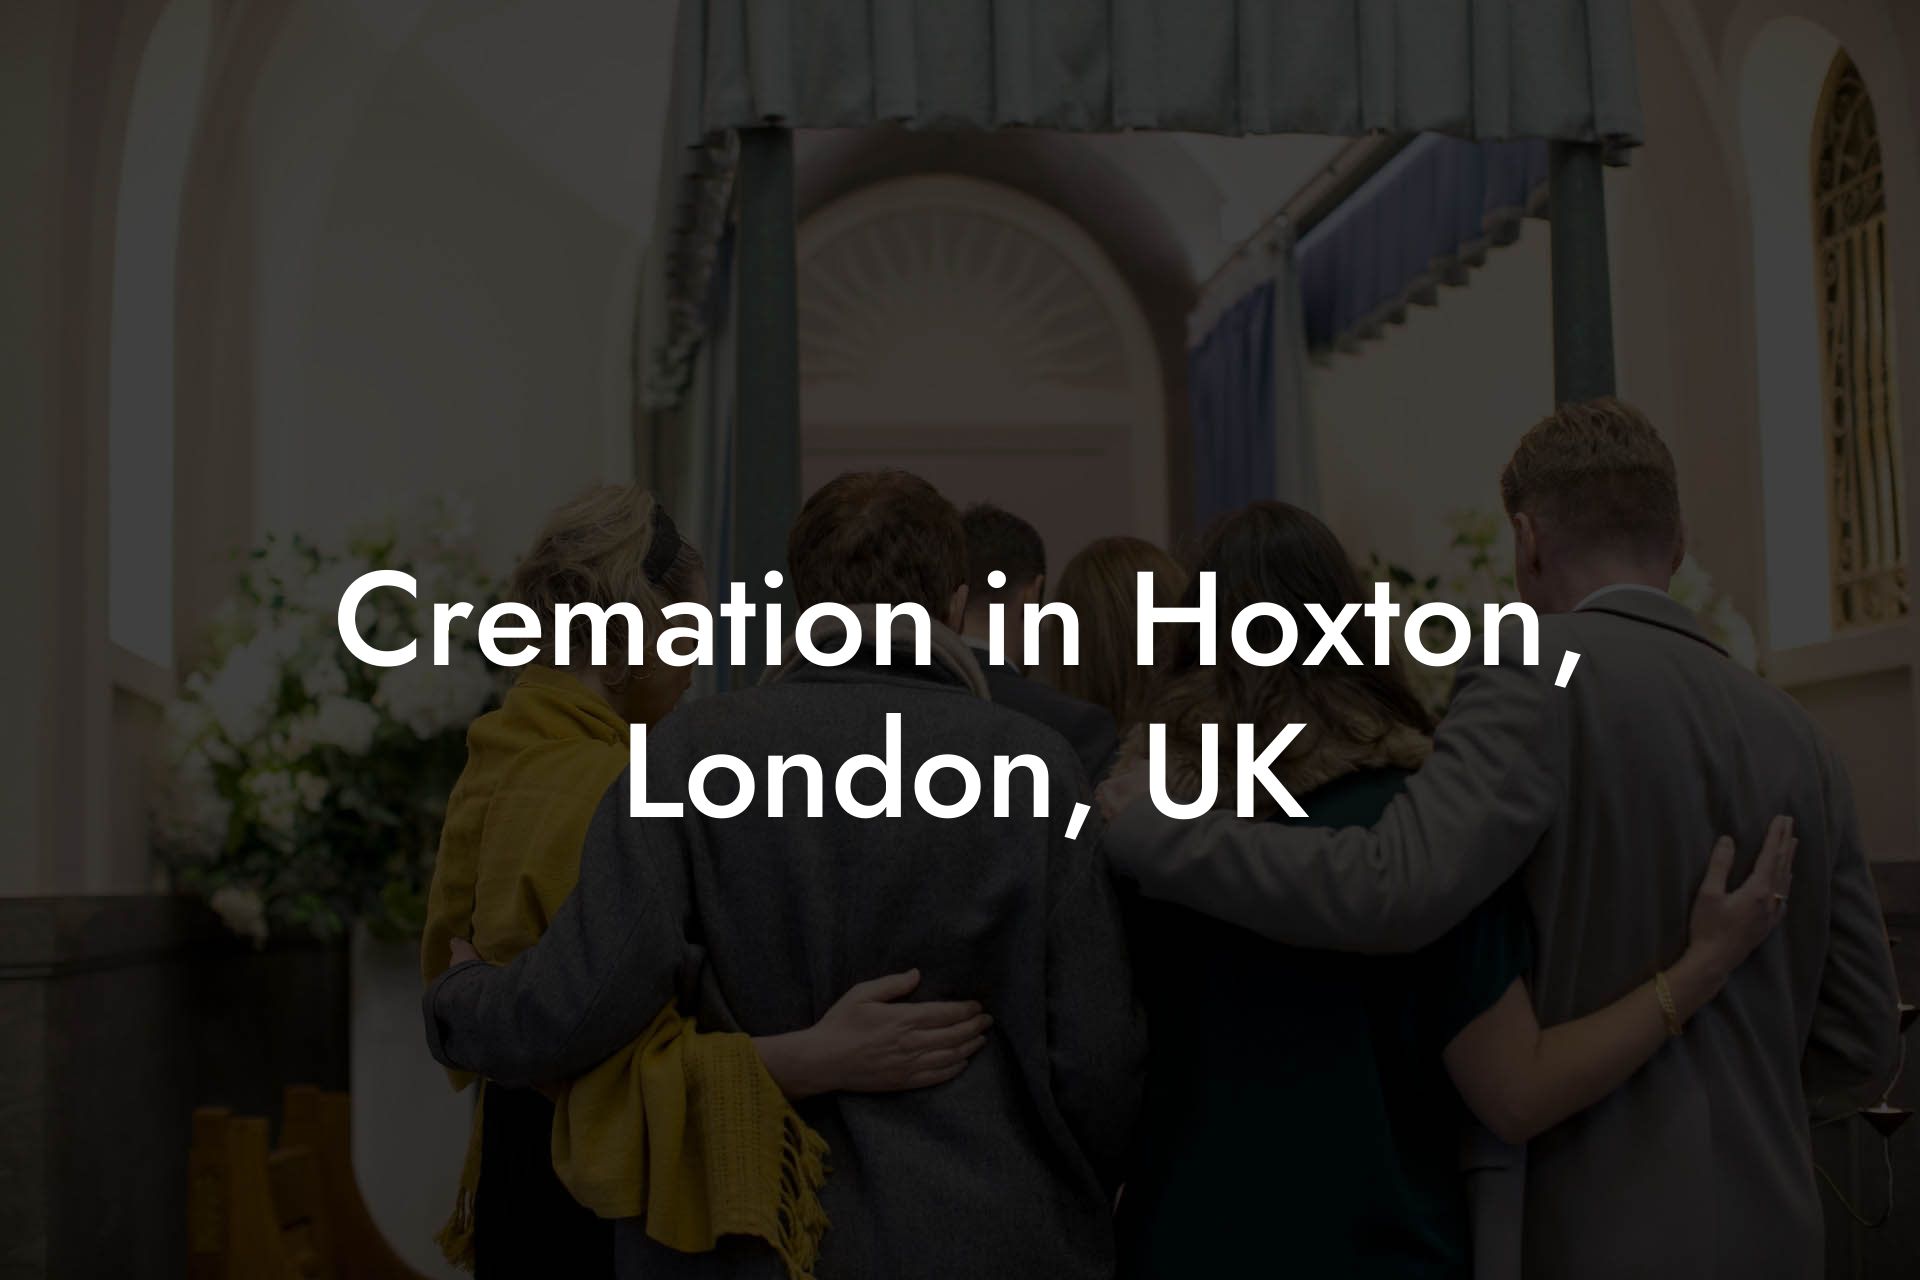 Cremation in Hoxton, London, UK